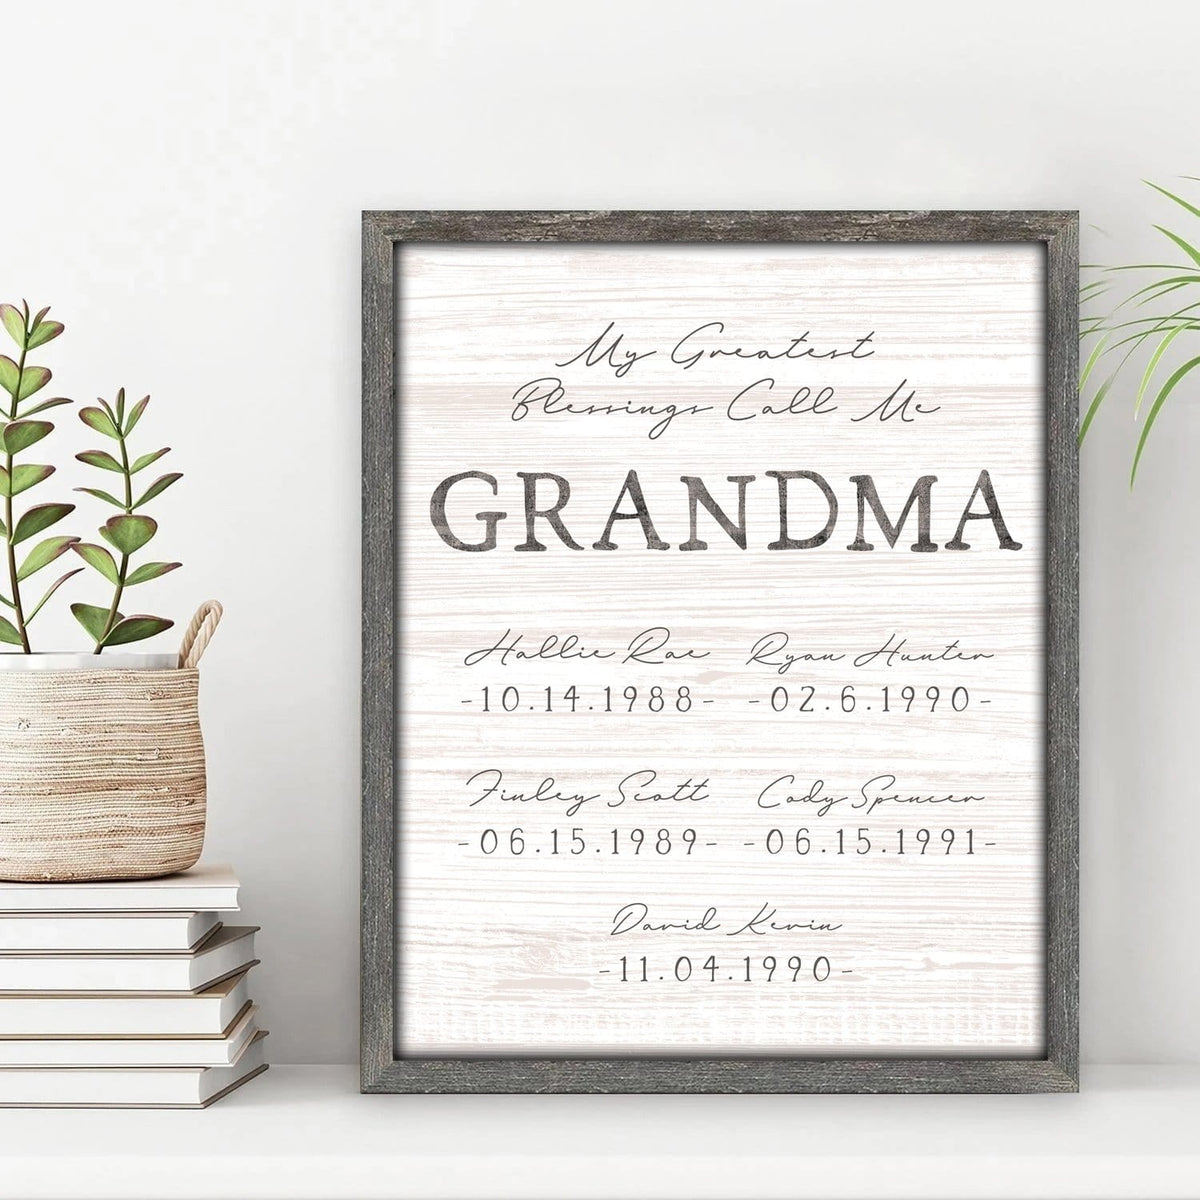 Framed Canvas - Personalized Grandma Gift with names of Grandchildren in the art